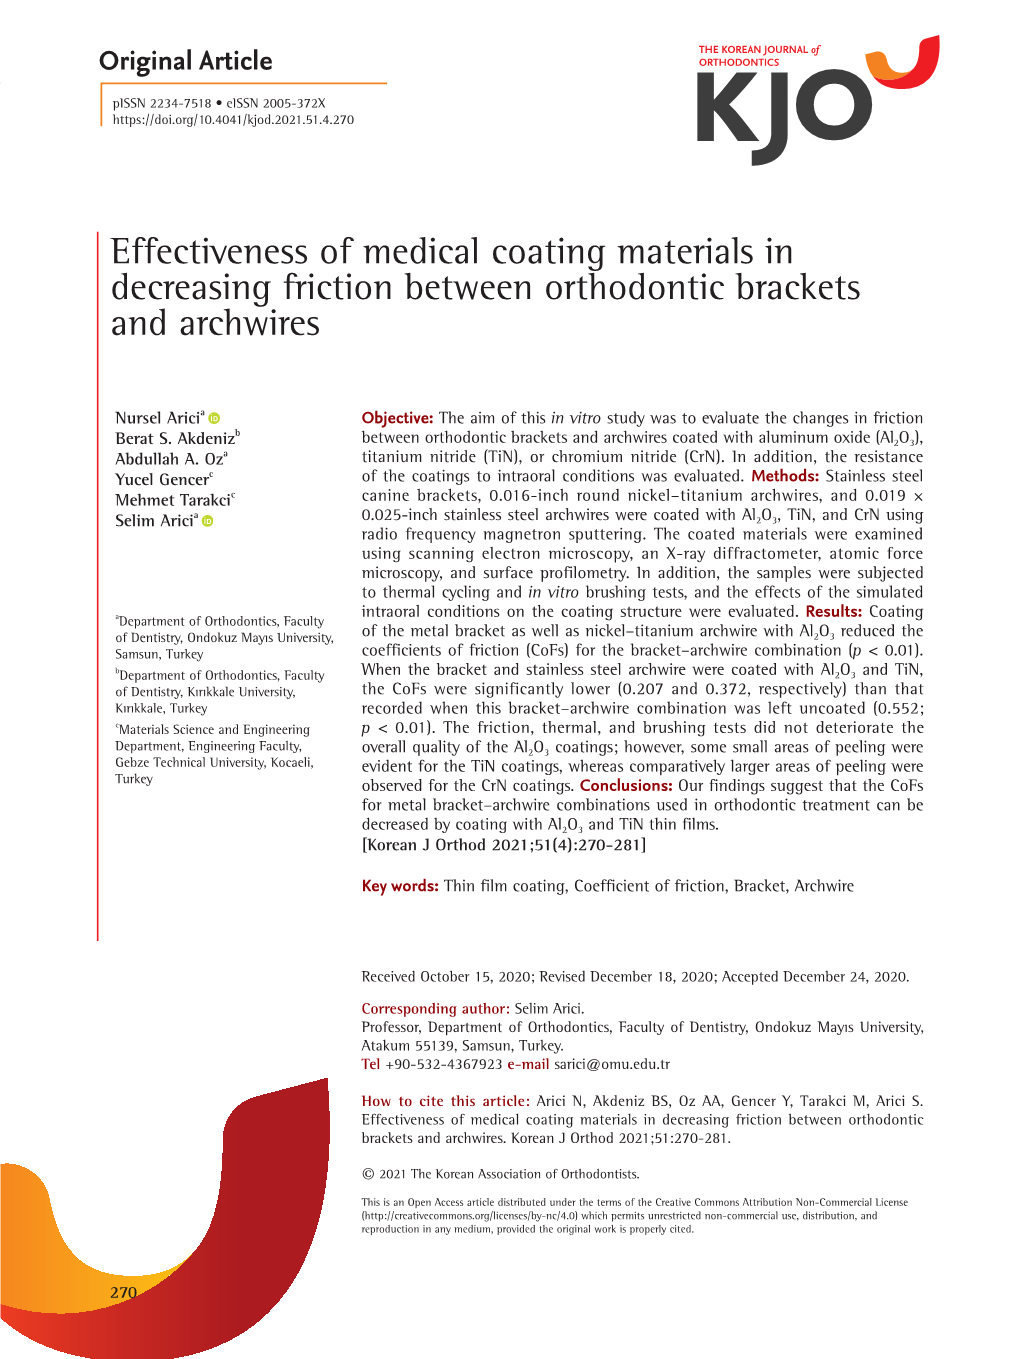 Effectiveness of Medical Coating Materials in Decreasing Friction Between Orthodontic Brackets and Archwires